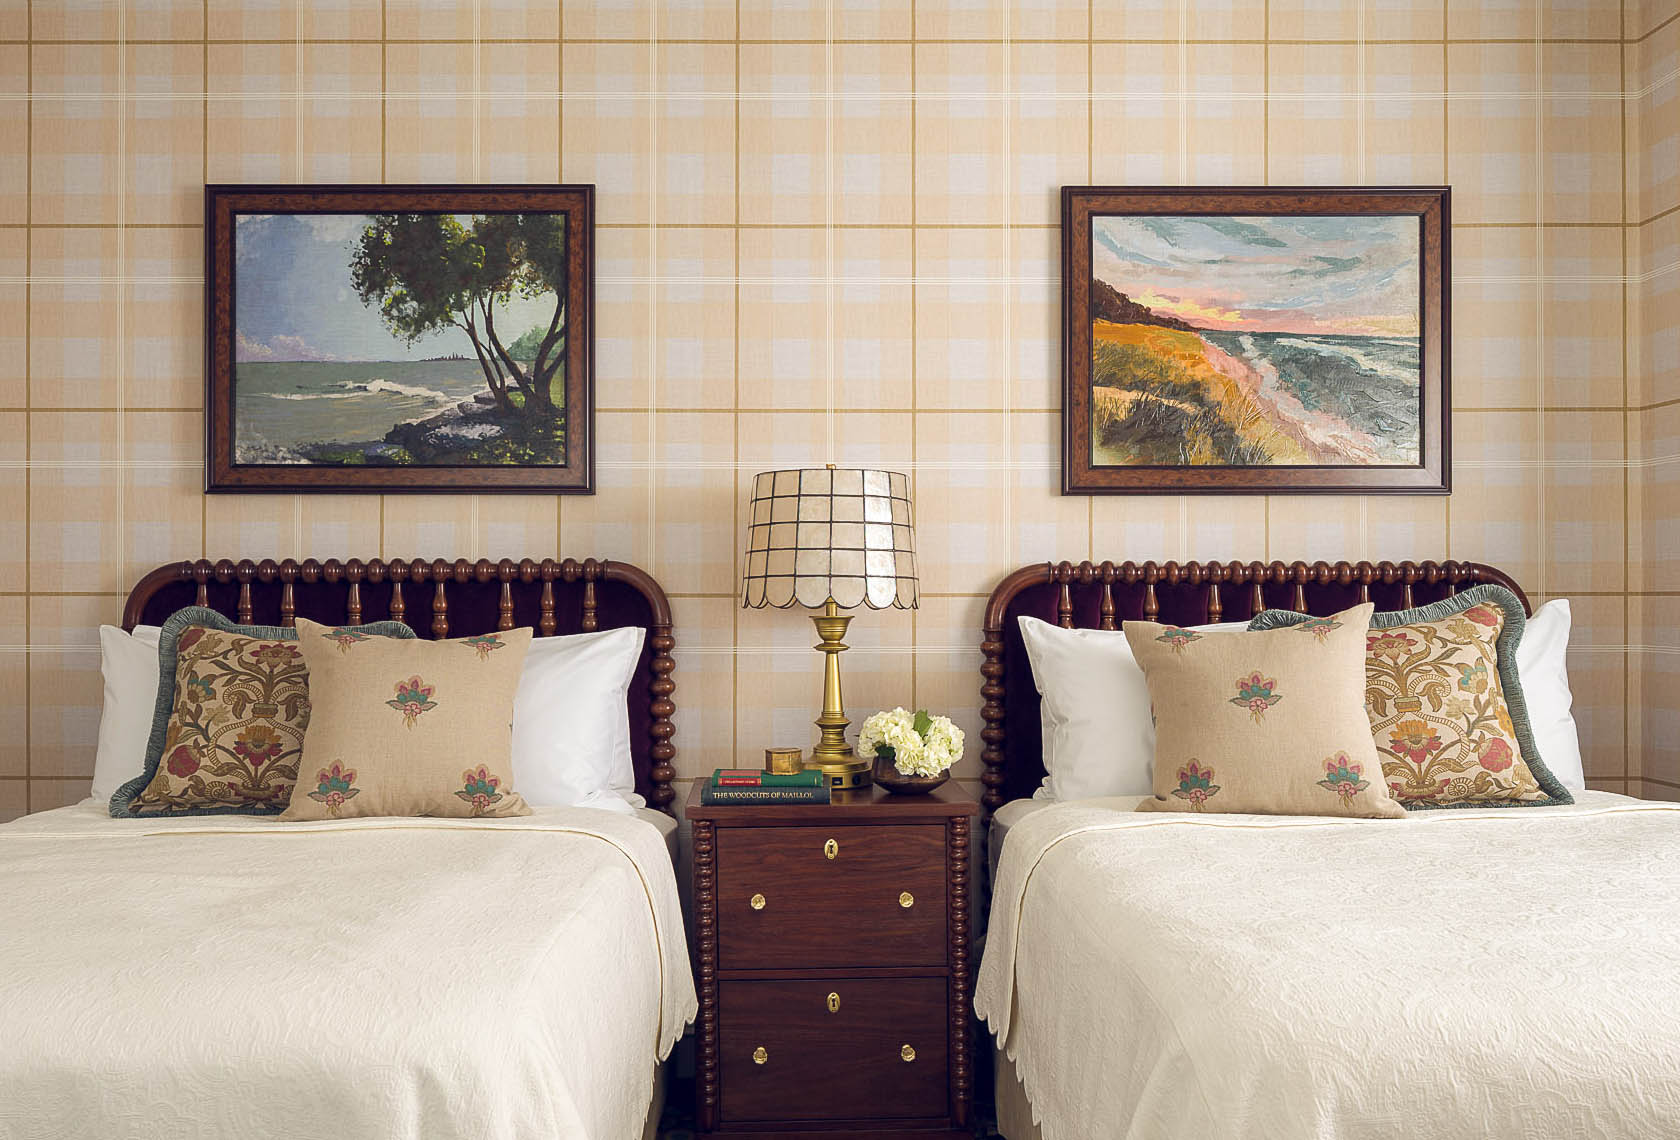 hotel bedroom with wallpaper and framed art over bed